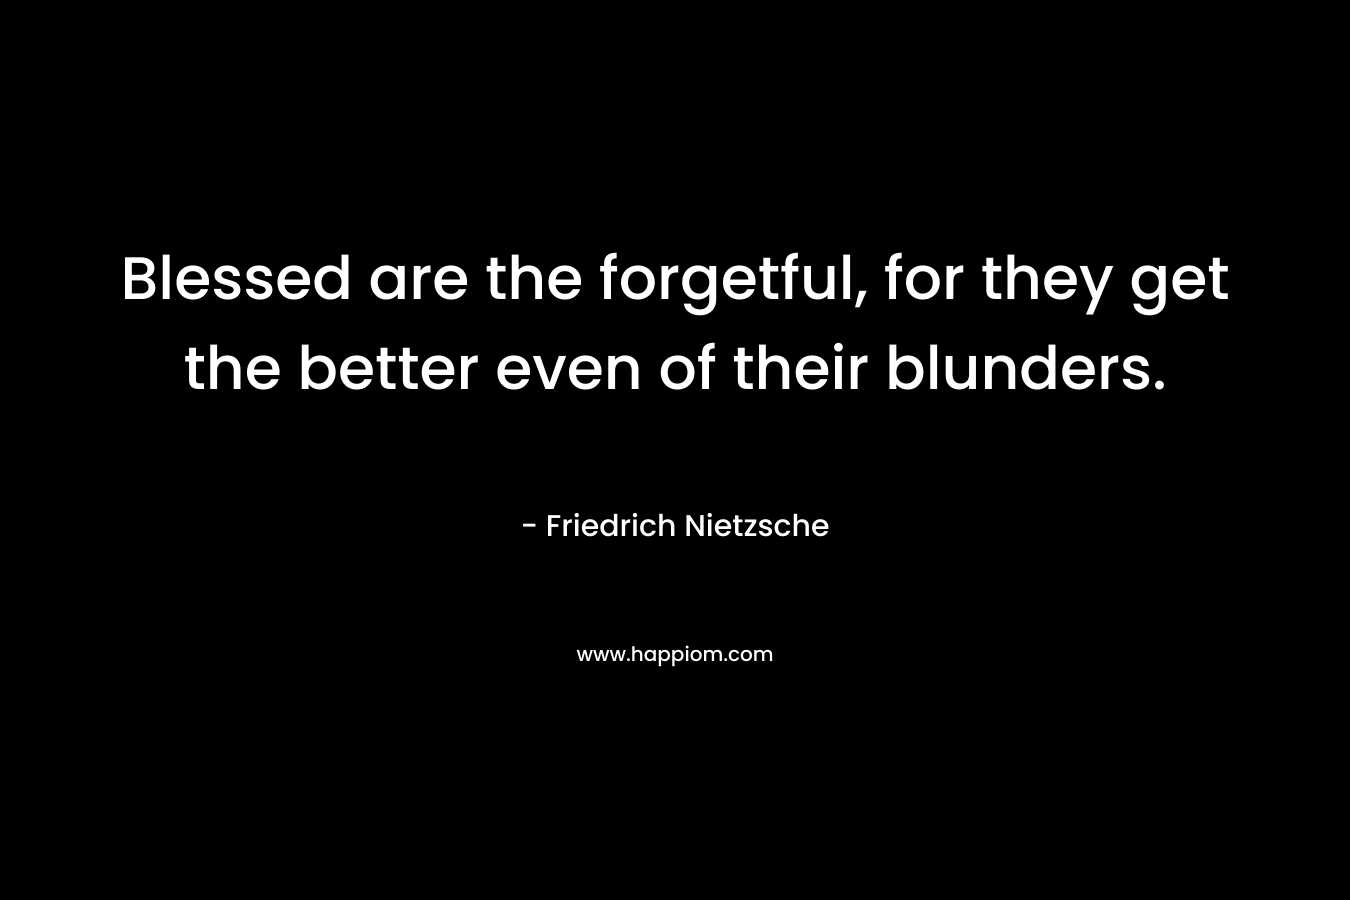 Blessed are the forgetful, for they get the better even of their blunders.